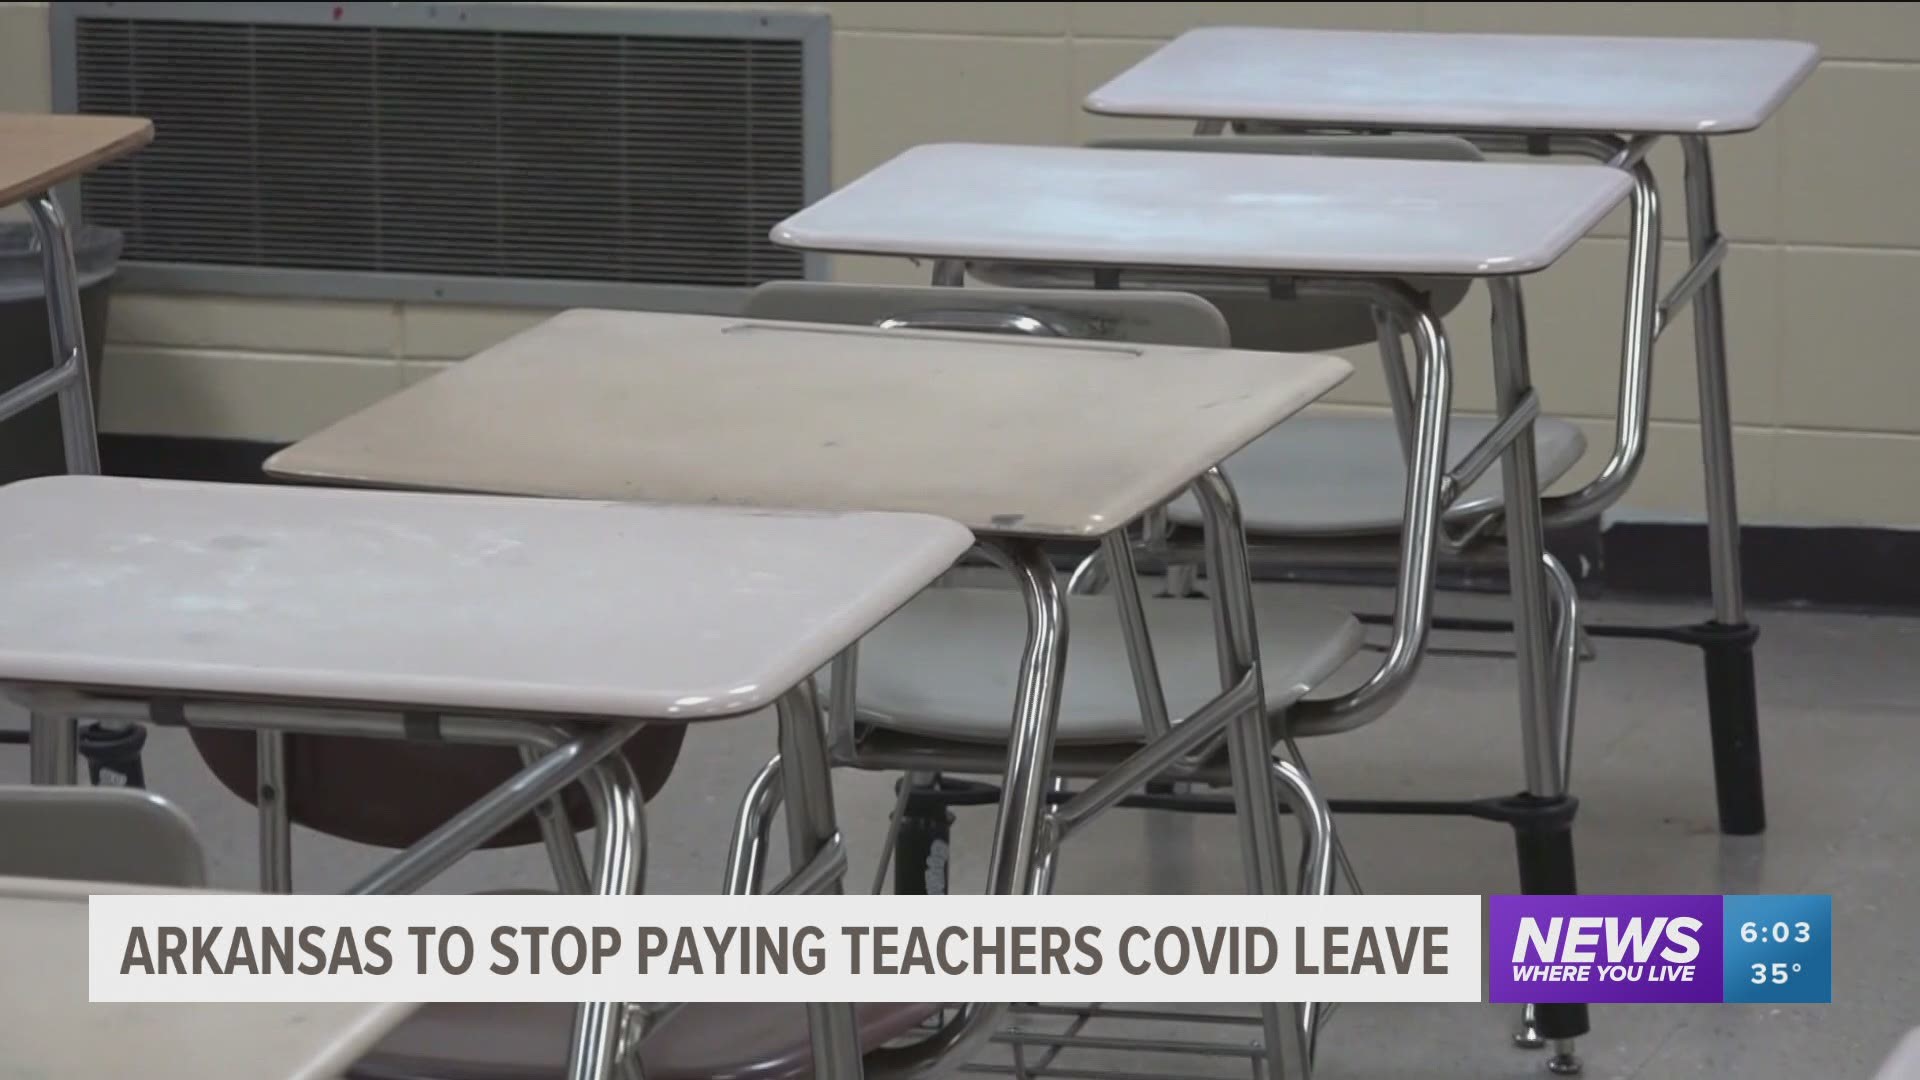 Many school districts are finding ways to make sure staff still have extra paid time off in case they do get the virus or need to quarantine.